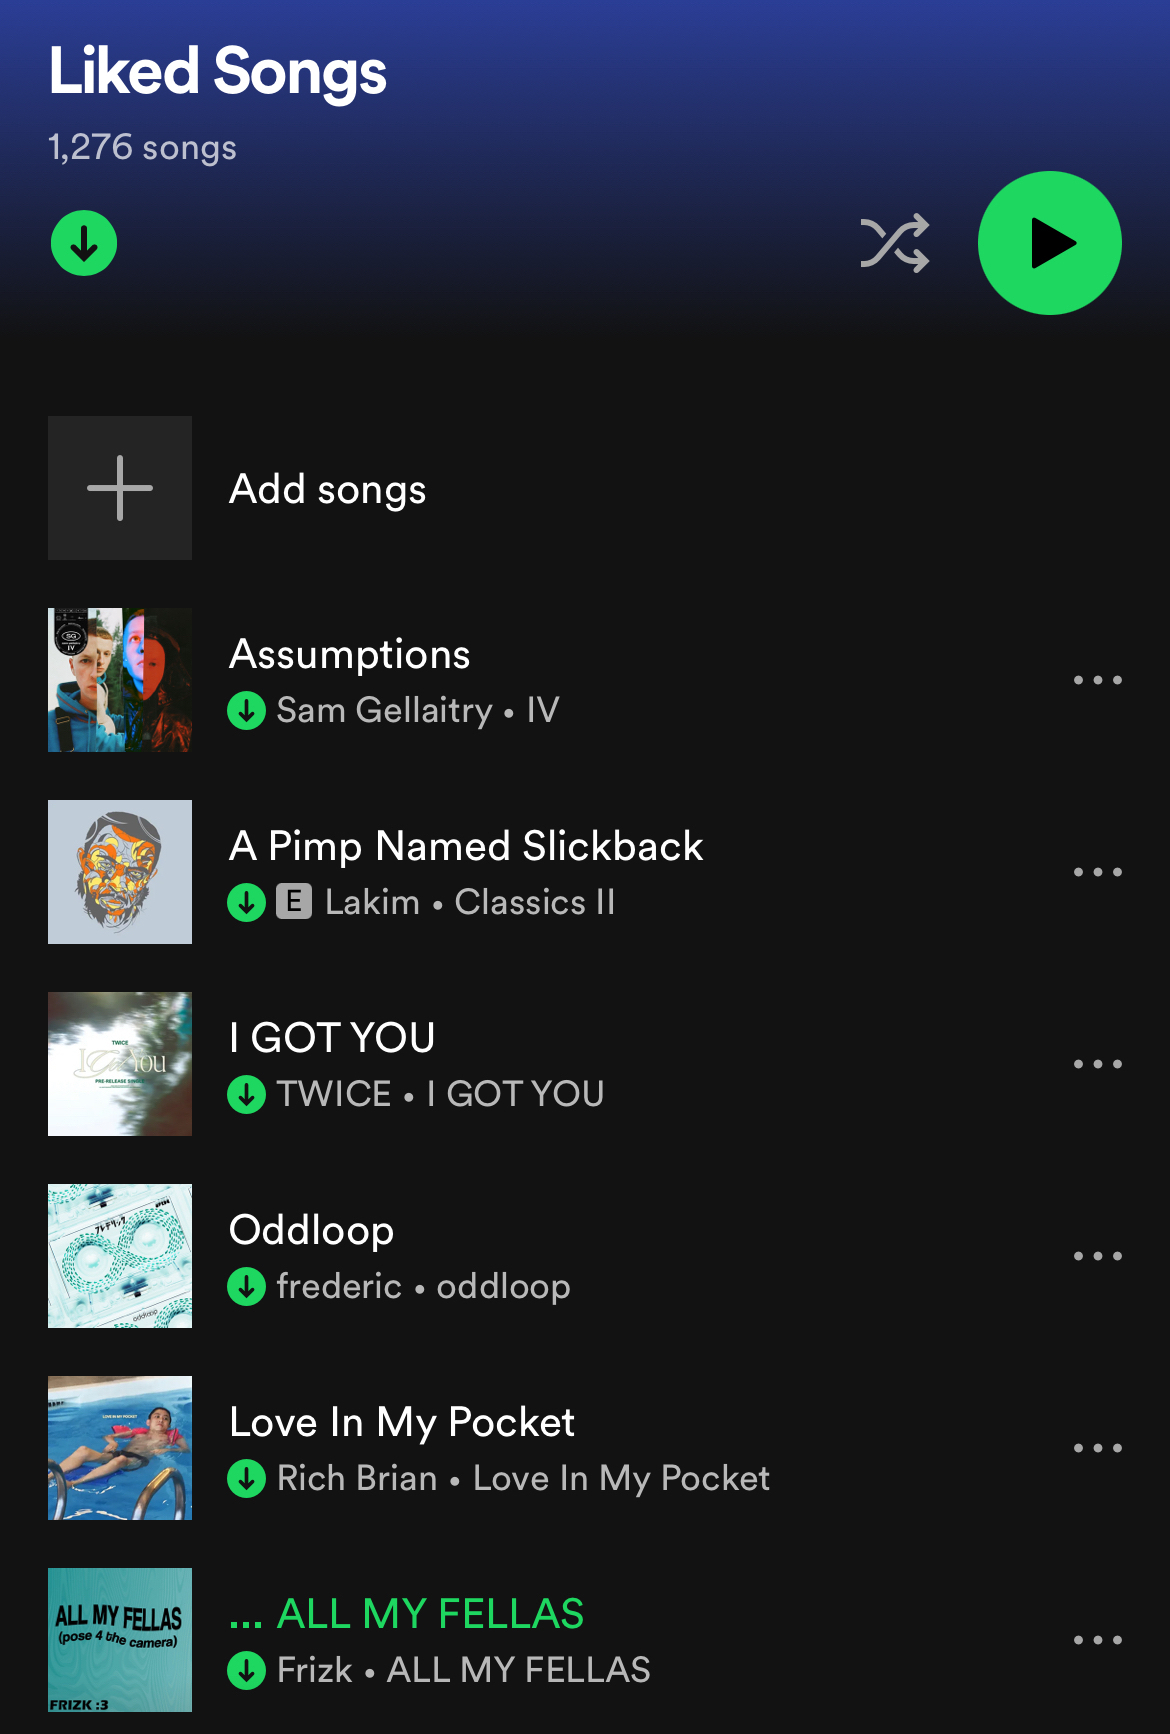 A screenshot of Chi’s Liked Songs playlist on Spotify, with the following songs shown: Assumptions by Sam Gellaitry from the IV album, A Pimp Named Slickback by Lakim from the Classics II album, I GOT YOU by TWICE from the I GOT YOU album, Oddloop by frederic from the oddloop album, Love In My Pocket by Rich Brian from the Love In My Pocket album, and ALL MY FELLAS by Frizk from the ALL MY FELLAS album.